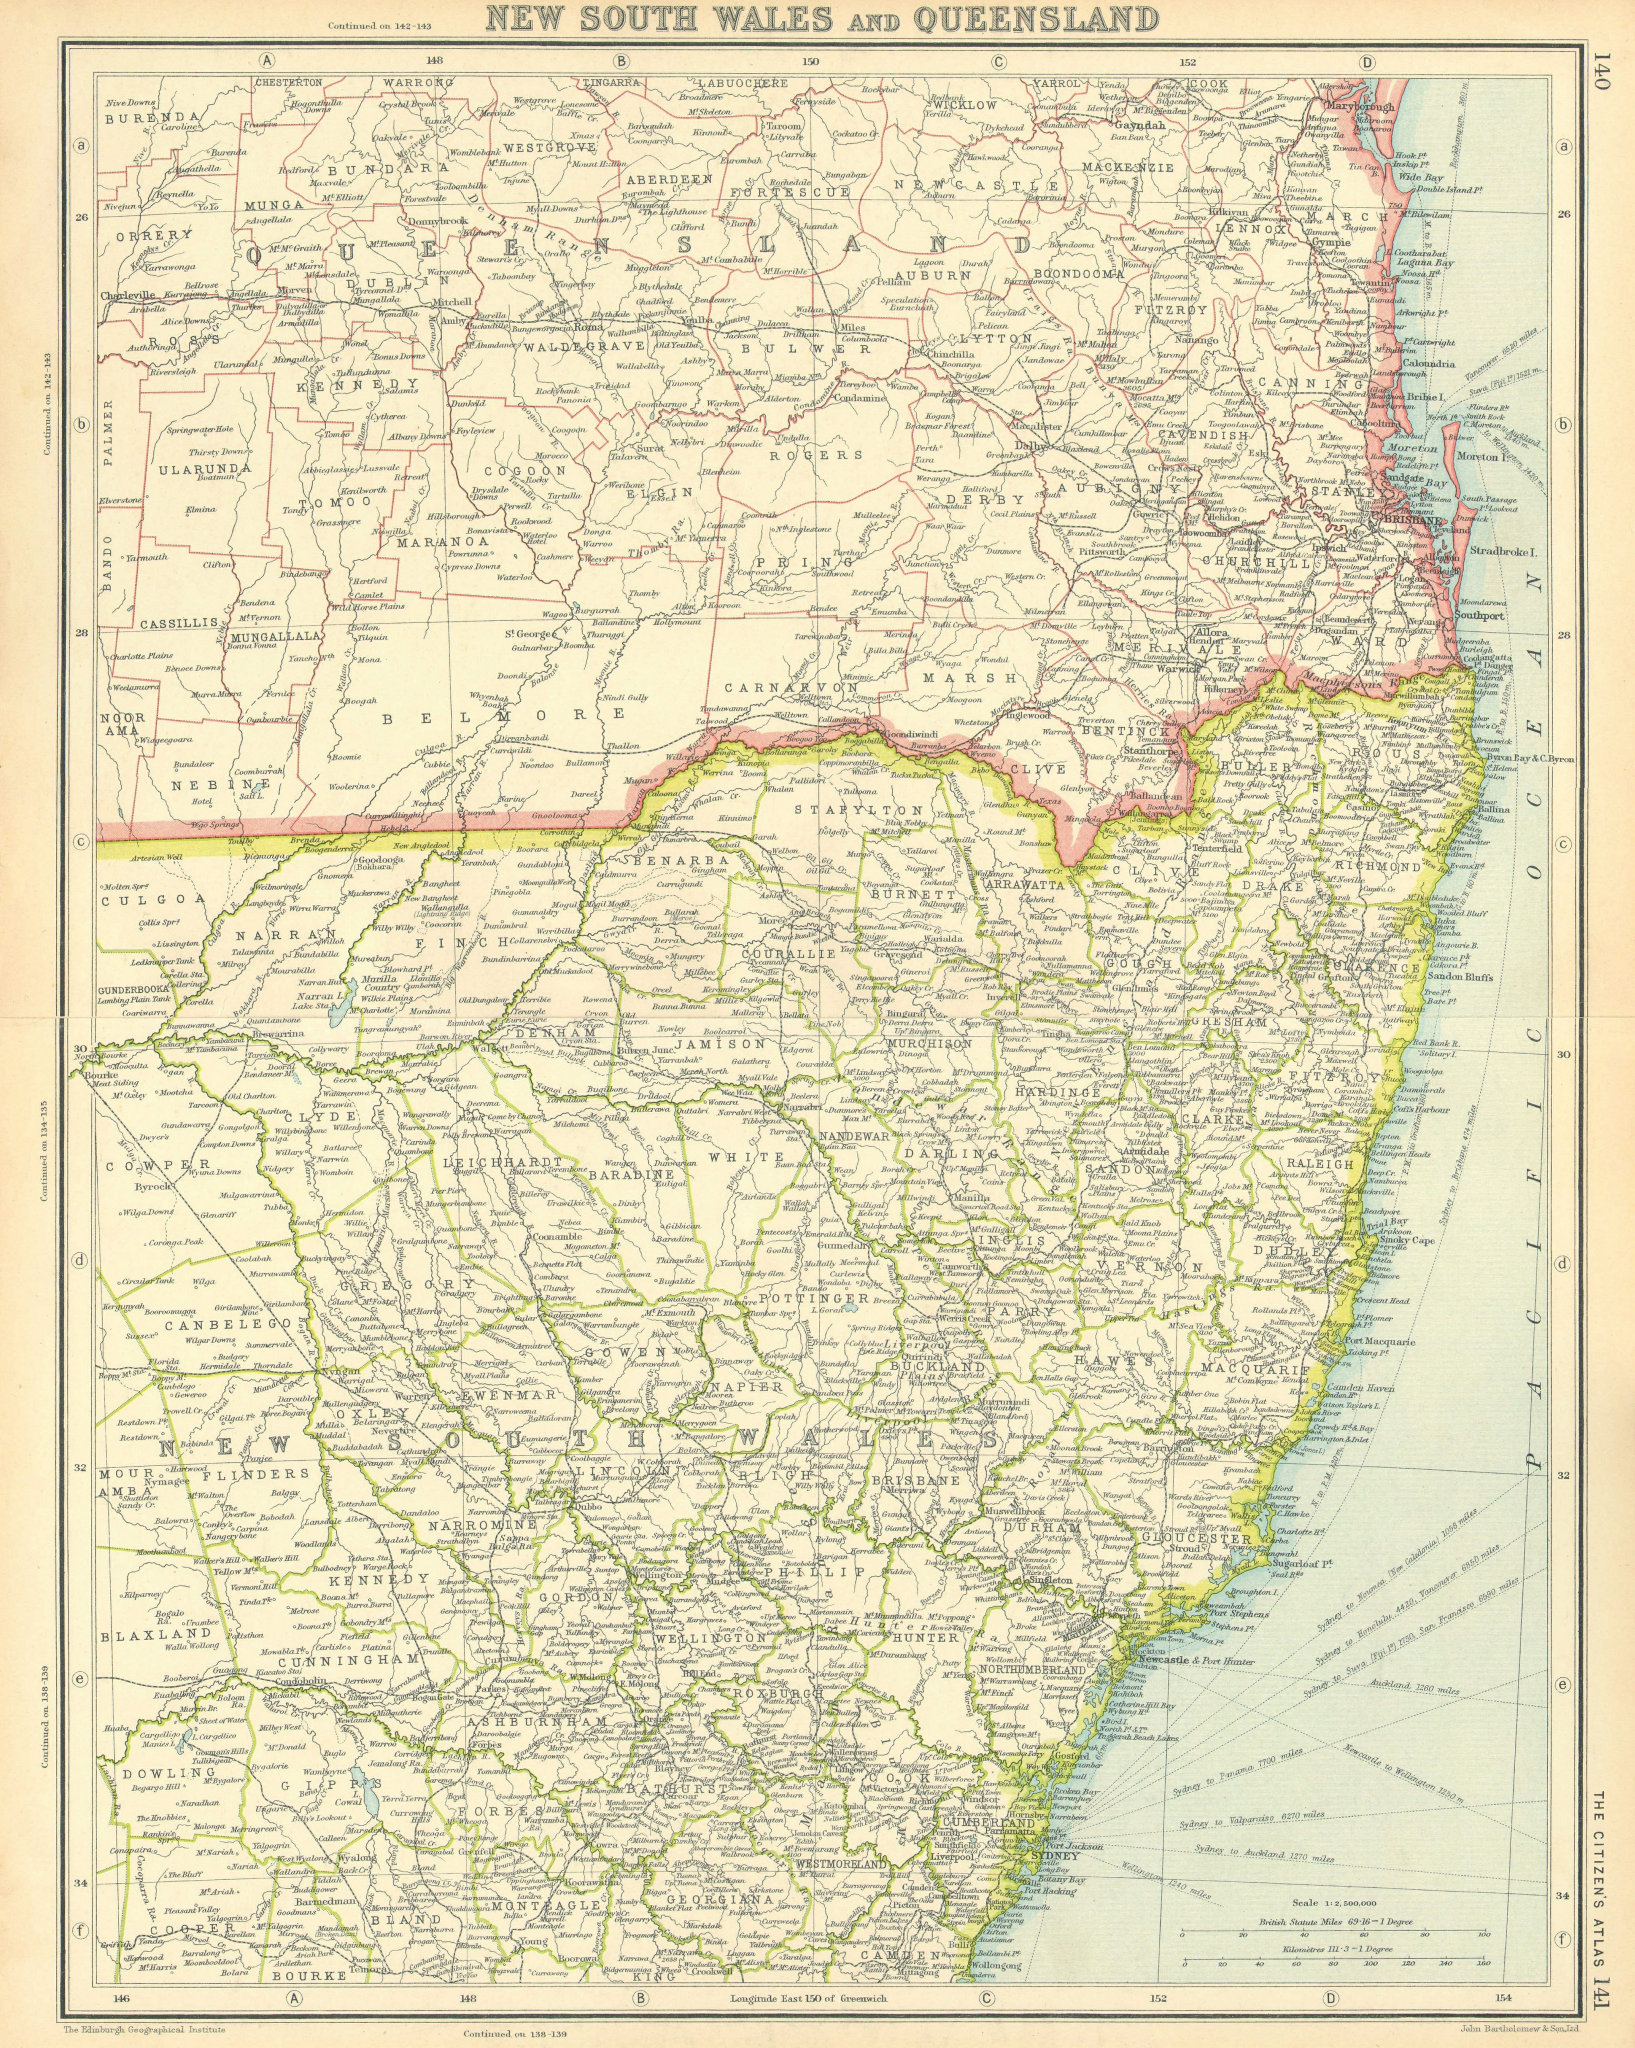 Associate Product AUSTRALIA EAST COAST. New South Wales and Queensland. Sydney Brisbane 1924 map